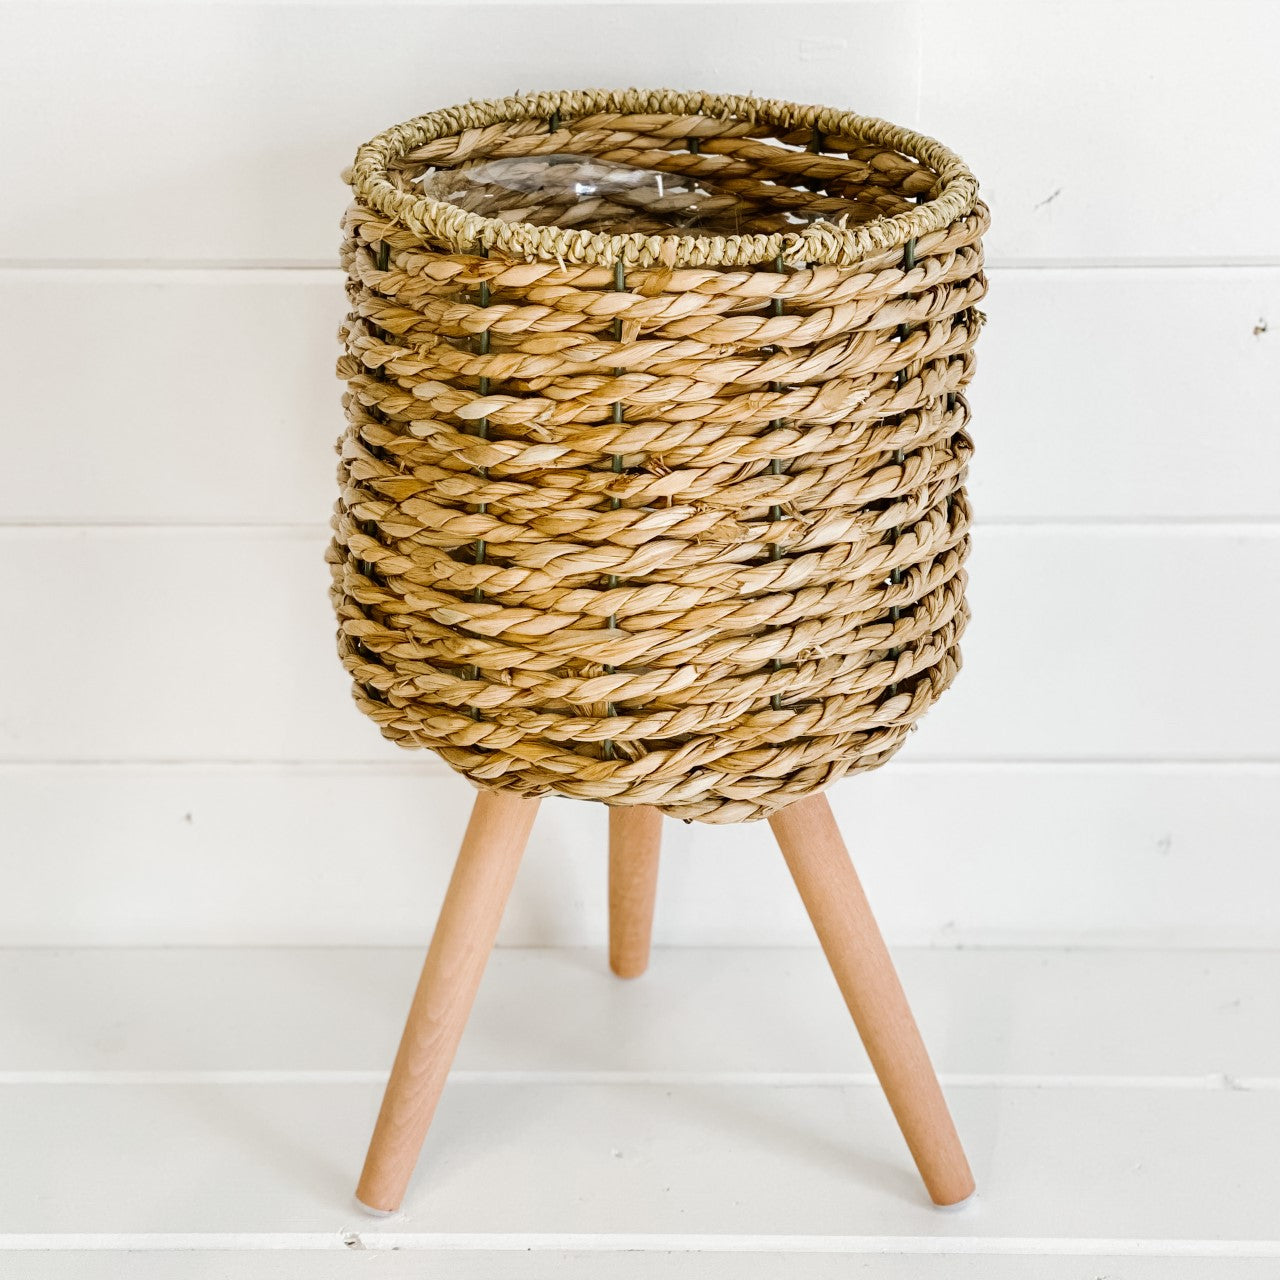 Seagrass Planter with Legs